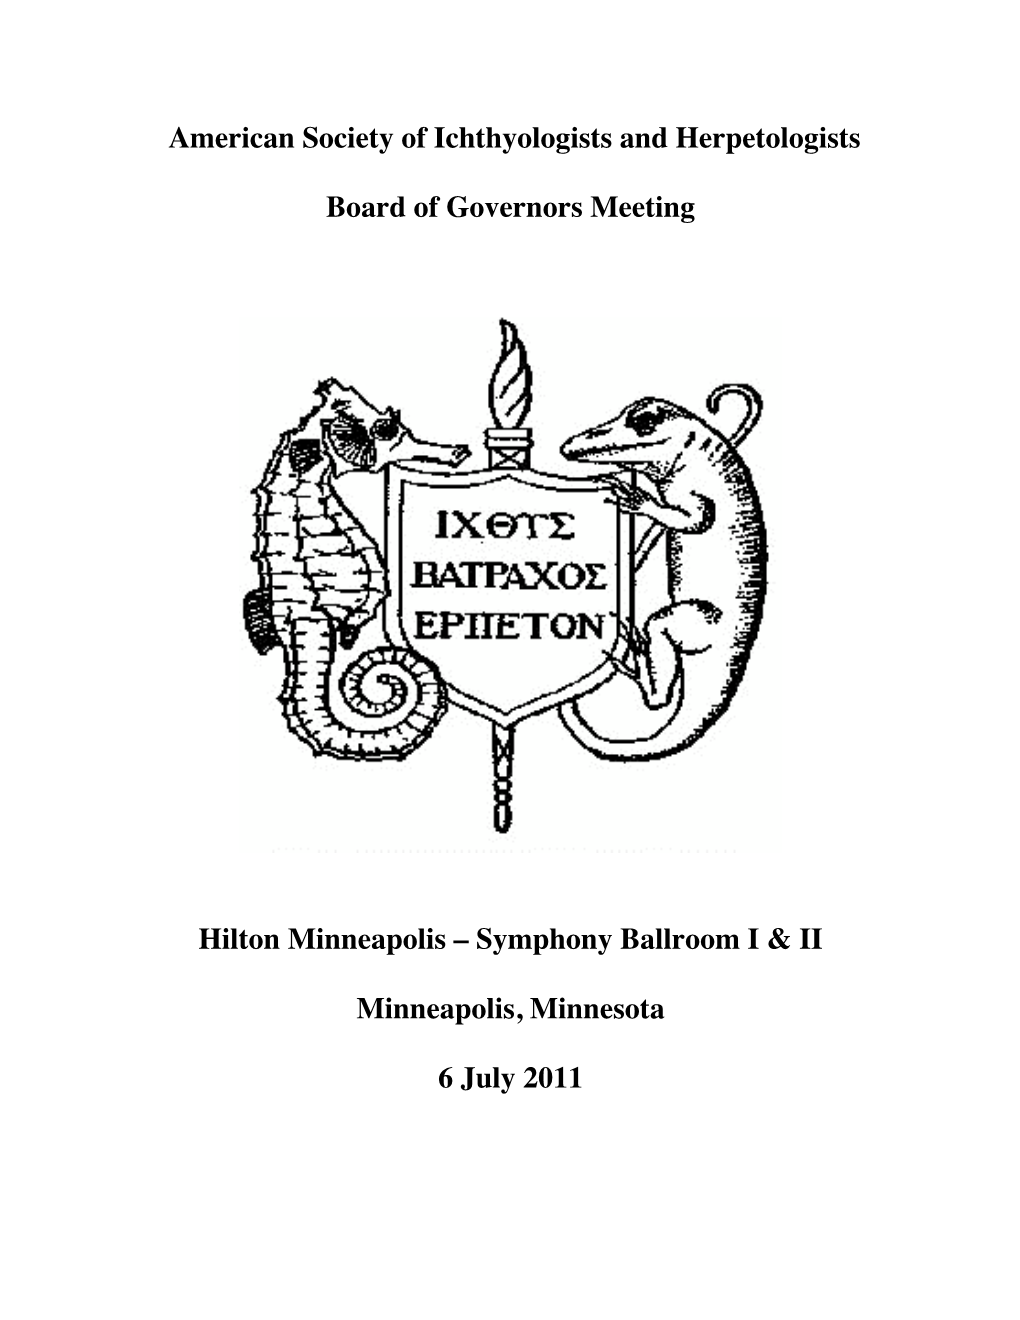 2011 Board of Governors Report